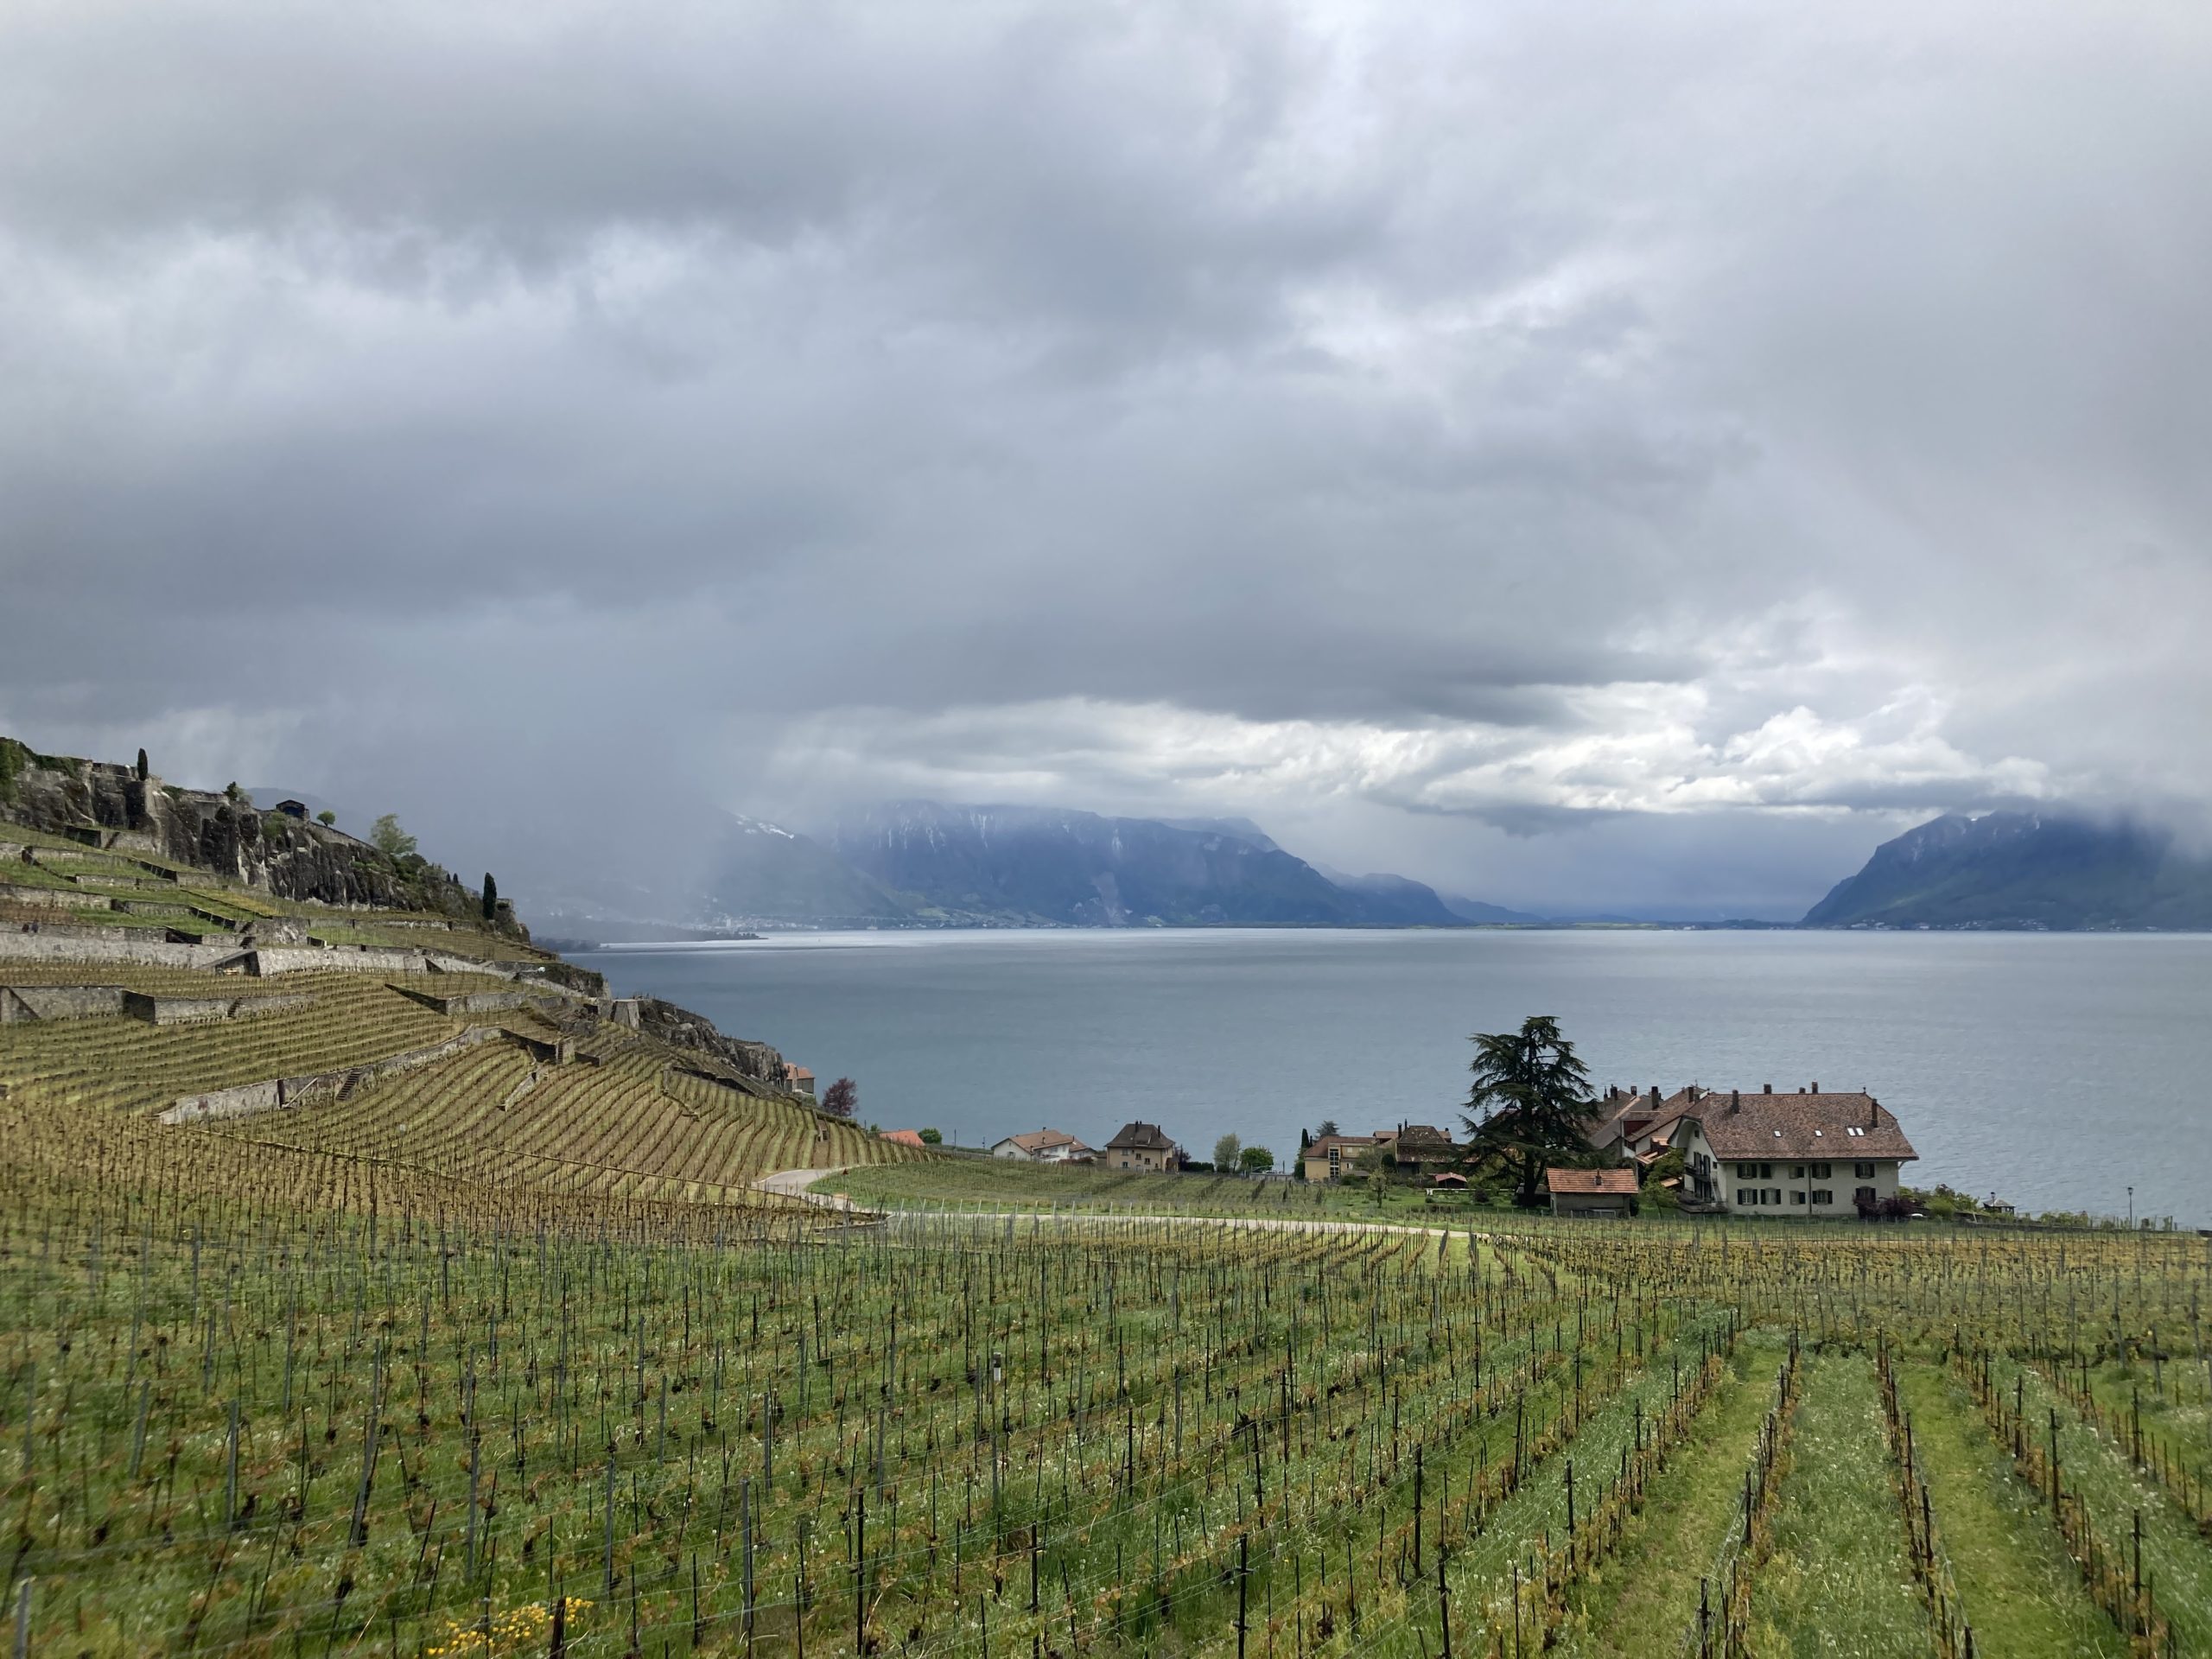 View on the walk from Puidoux to Vevey via the Lavaux Vineyards